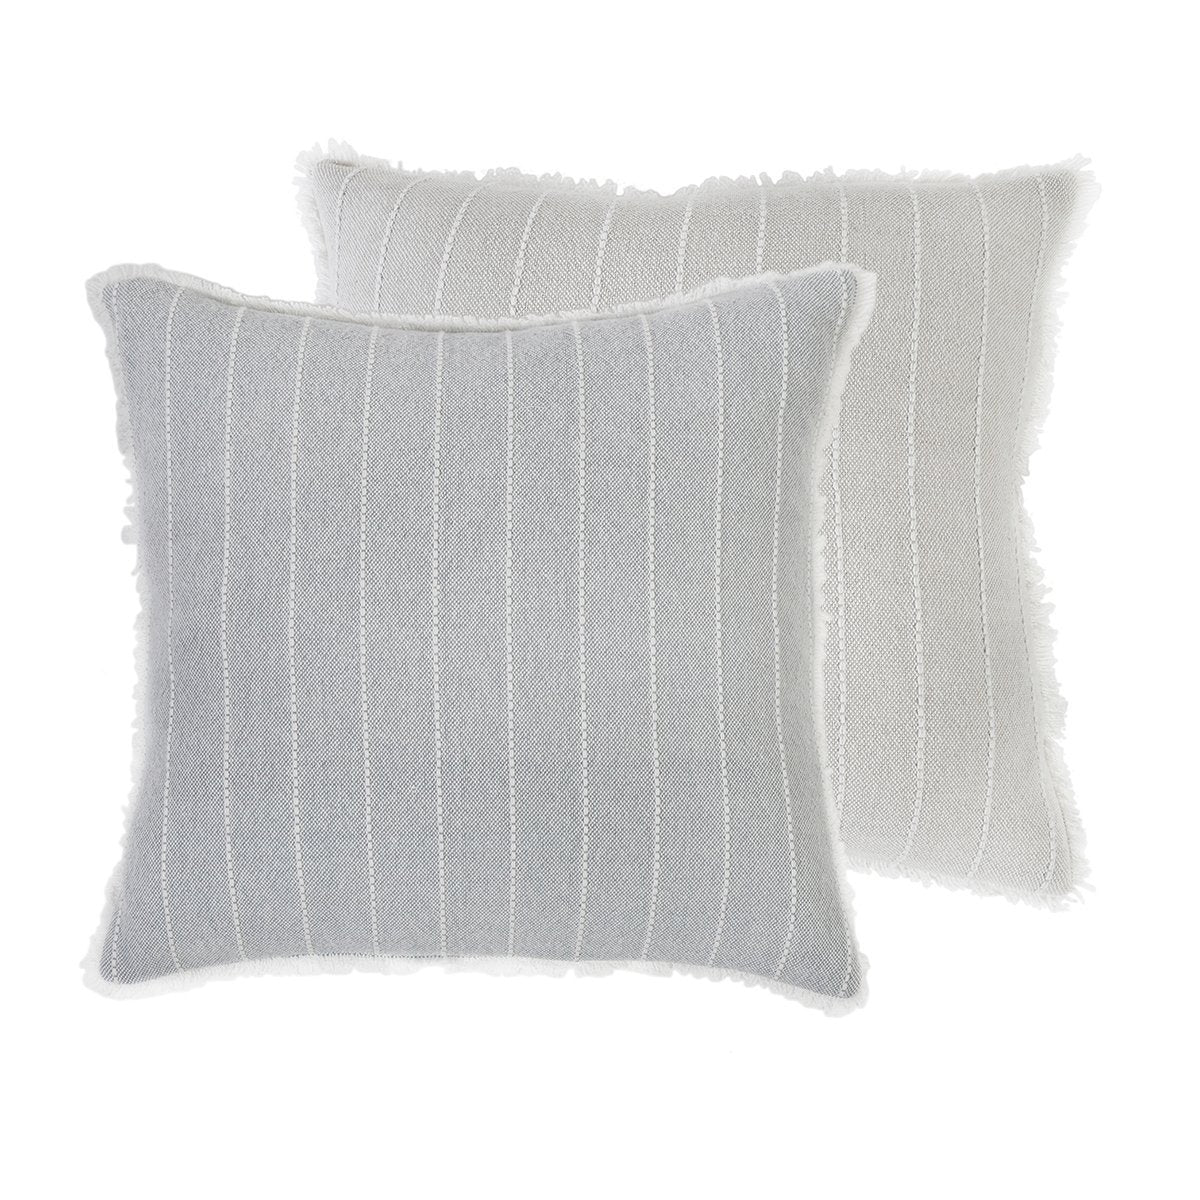 Henley Pillow by Pom at Home